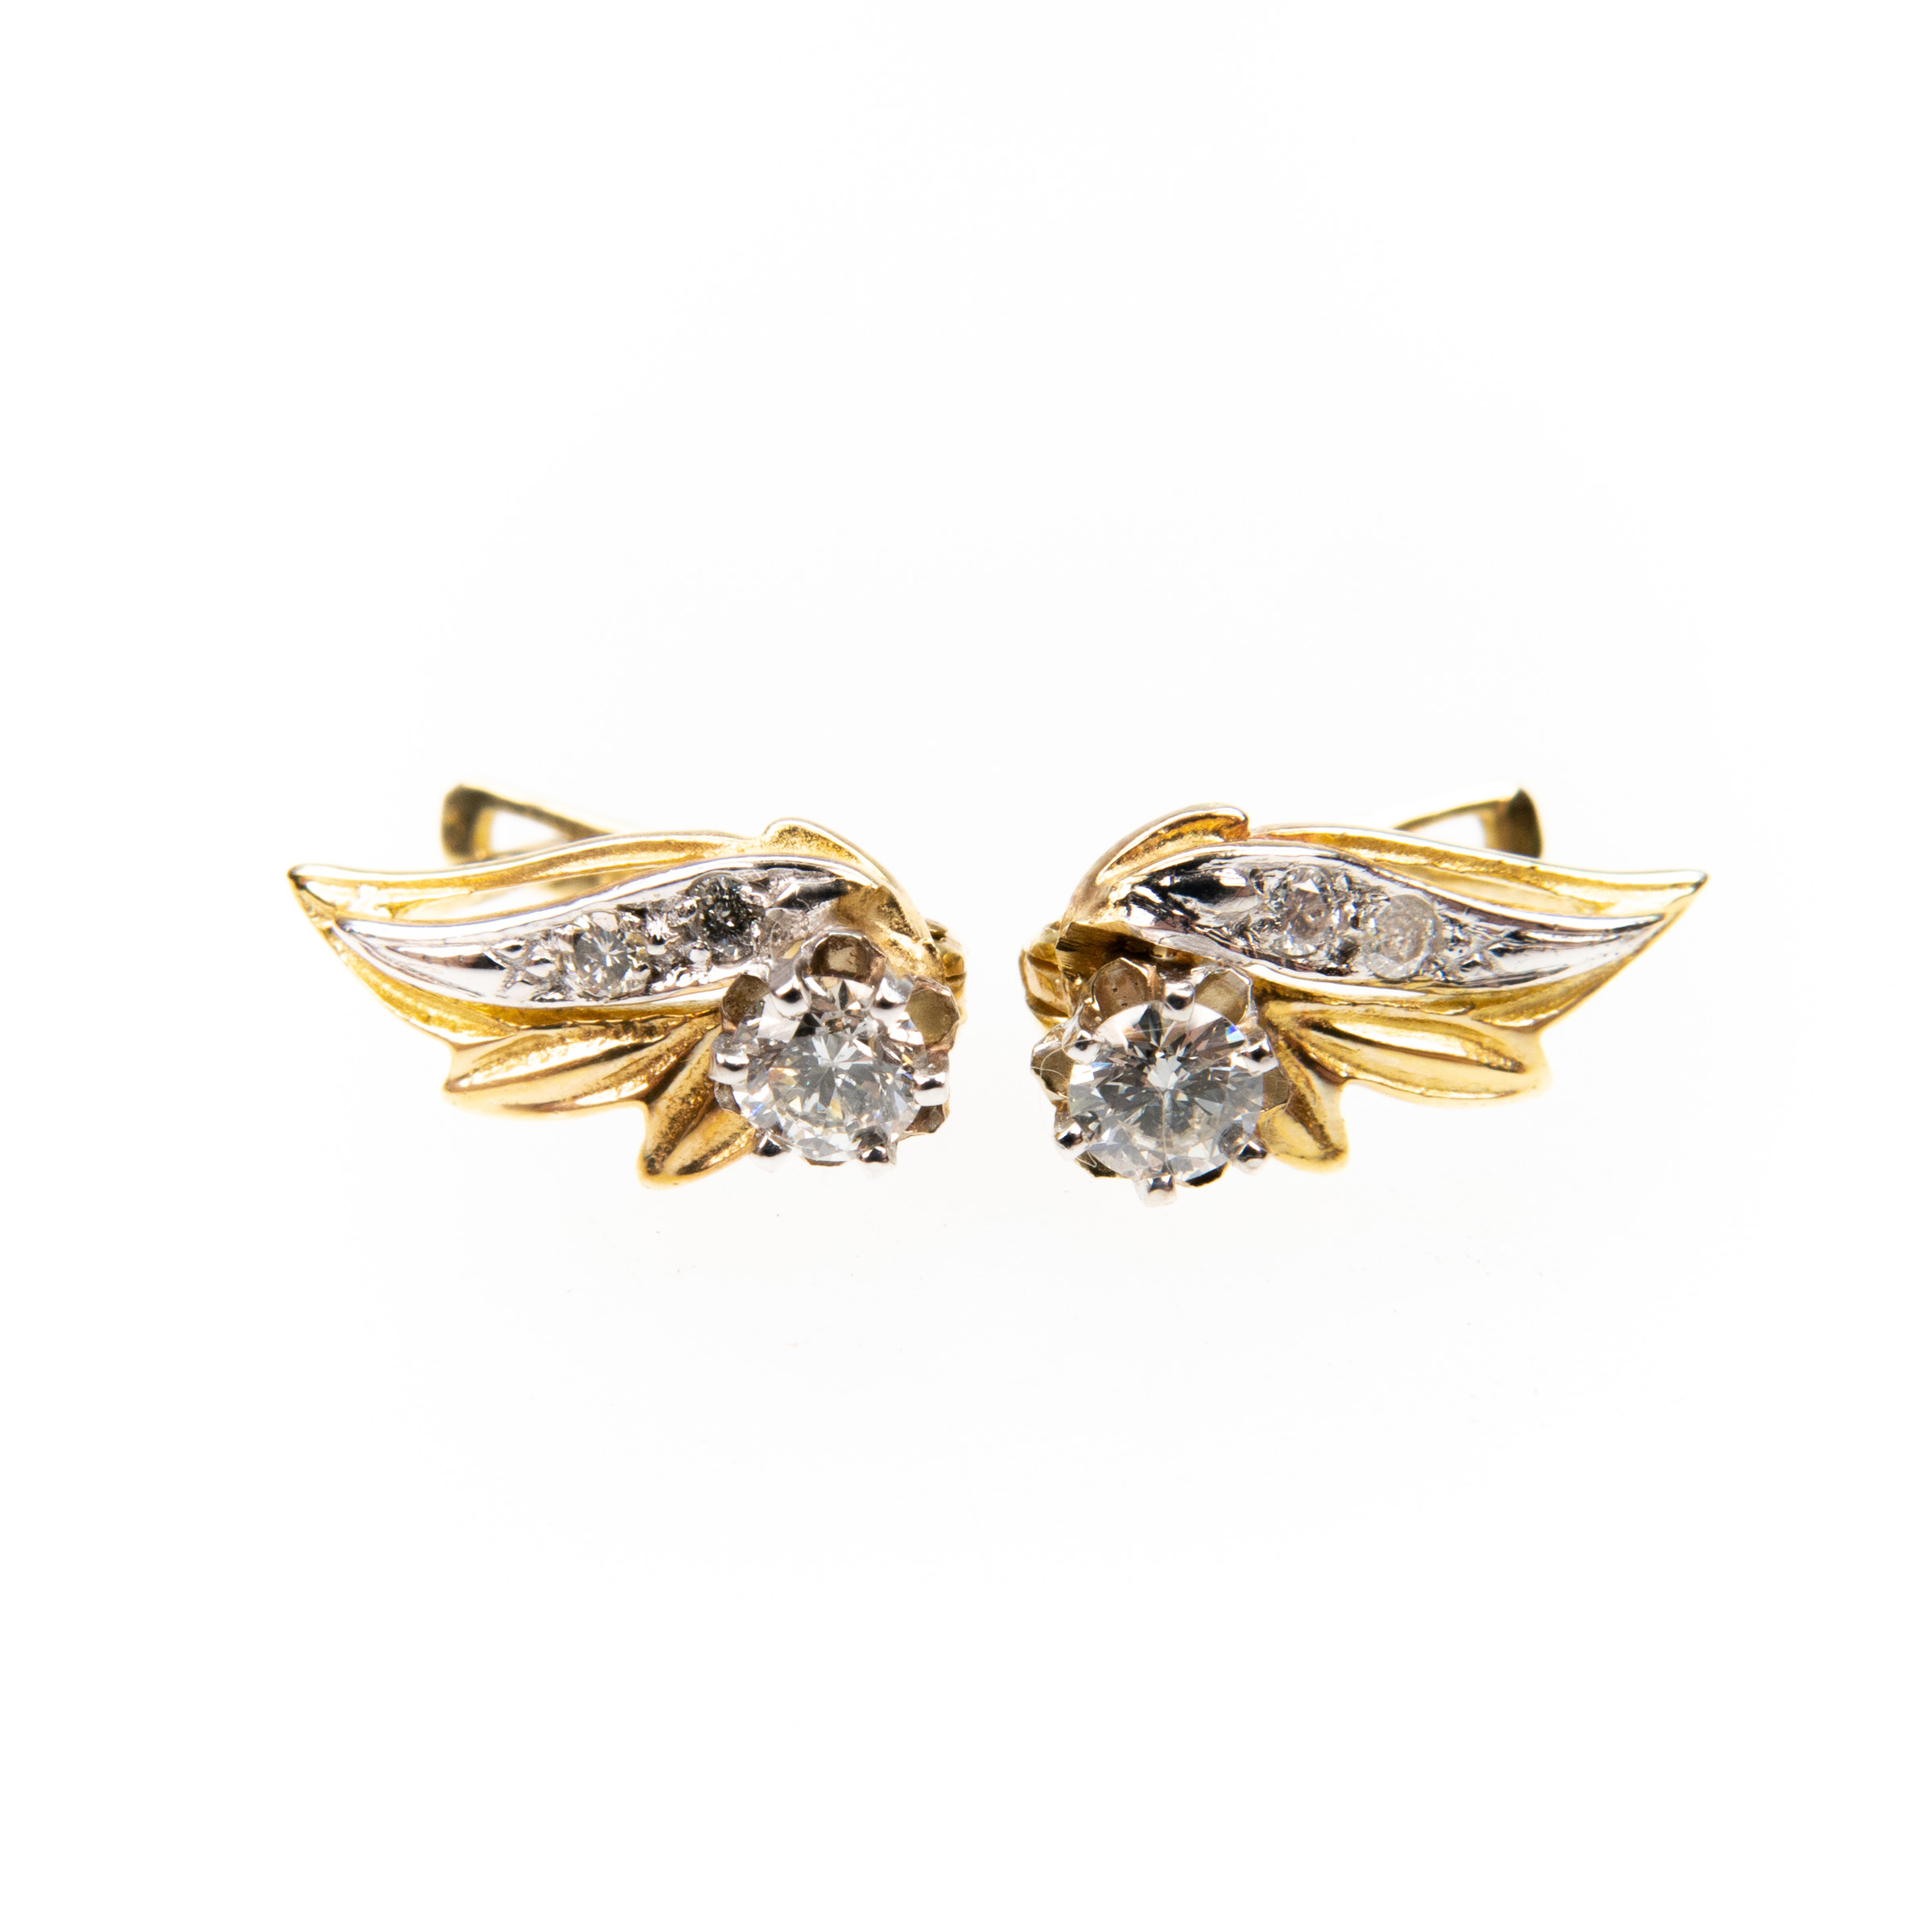 Pair Of 14K Yellow And White Gold Earrings